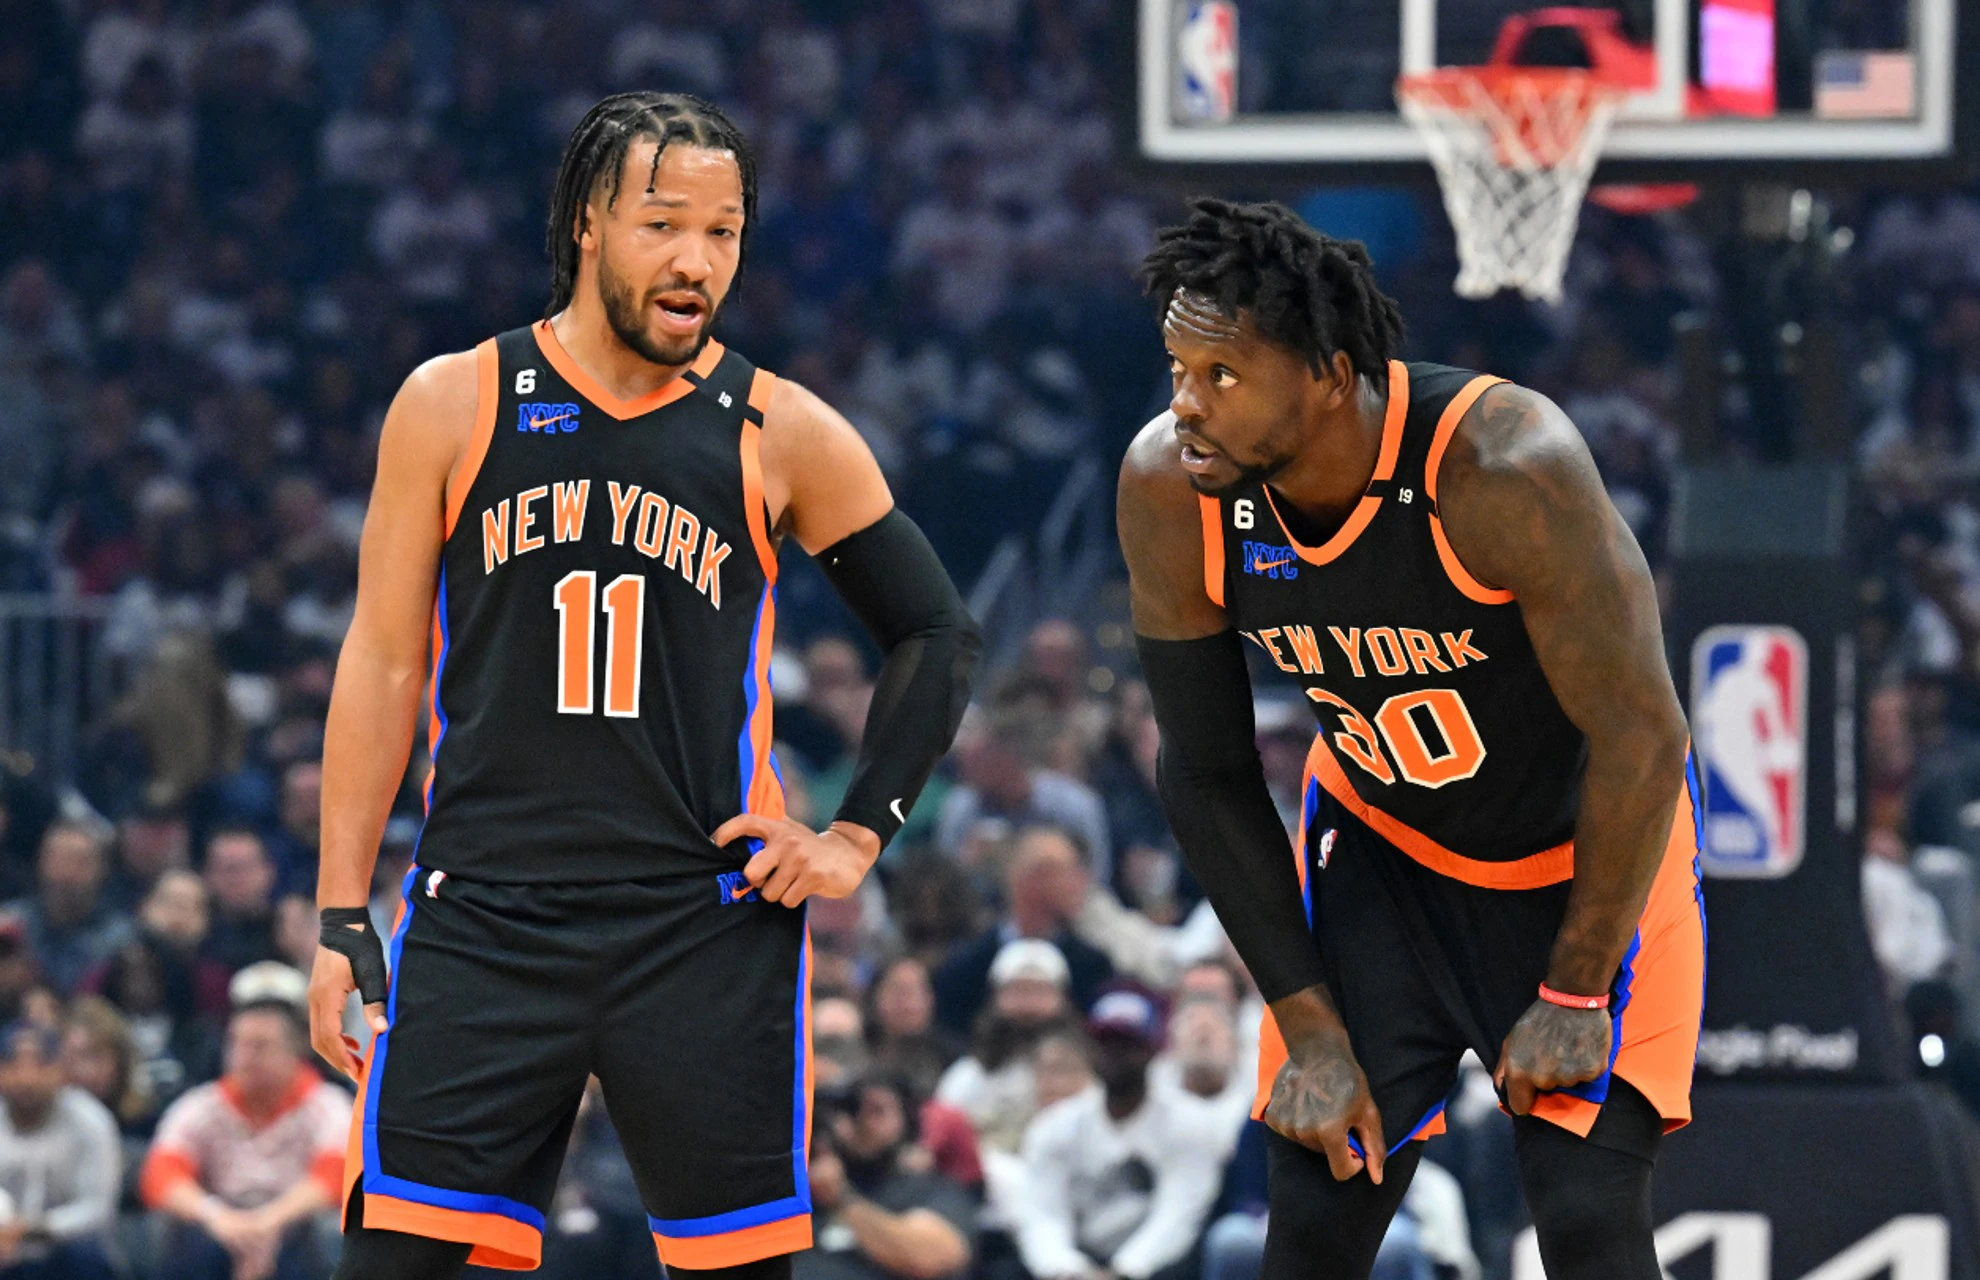 The New York Knicks’ Offseason, Resolving Important Internal Issues and Looking Forward